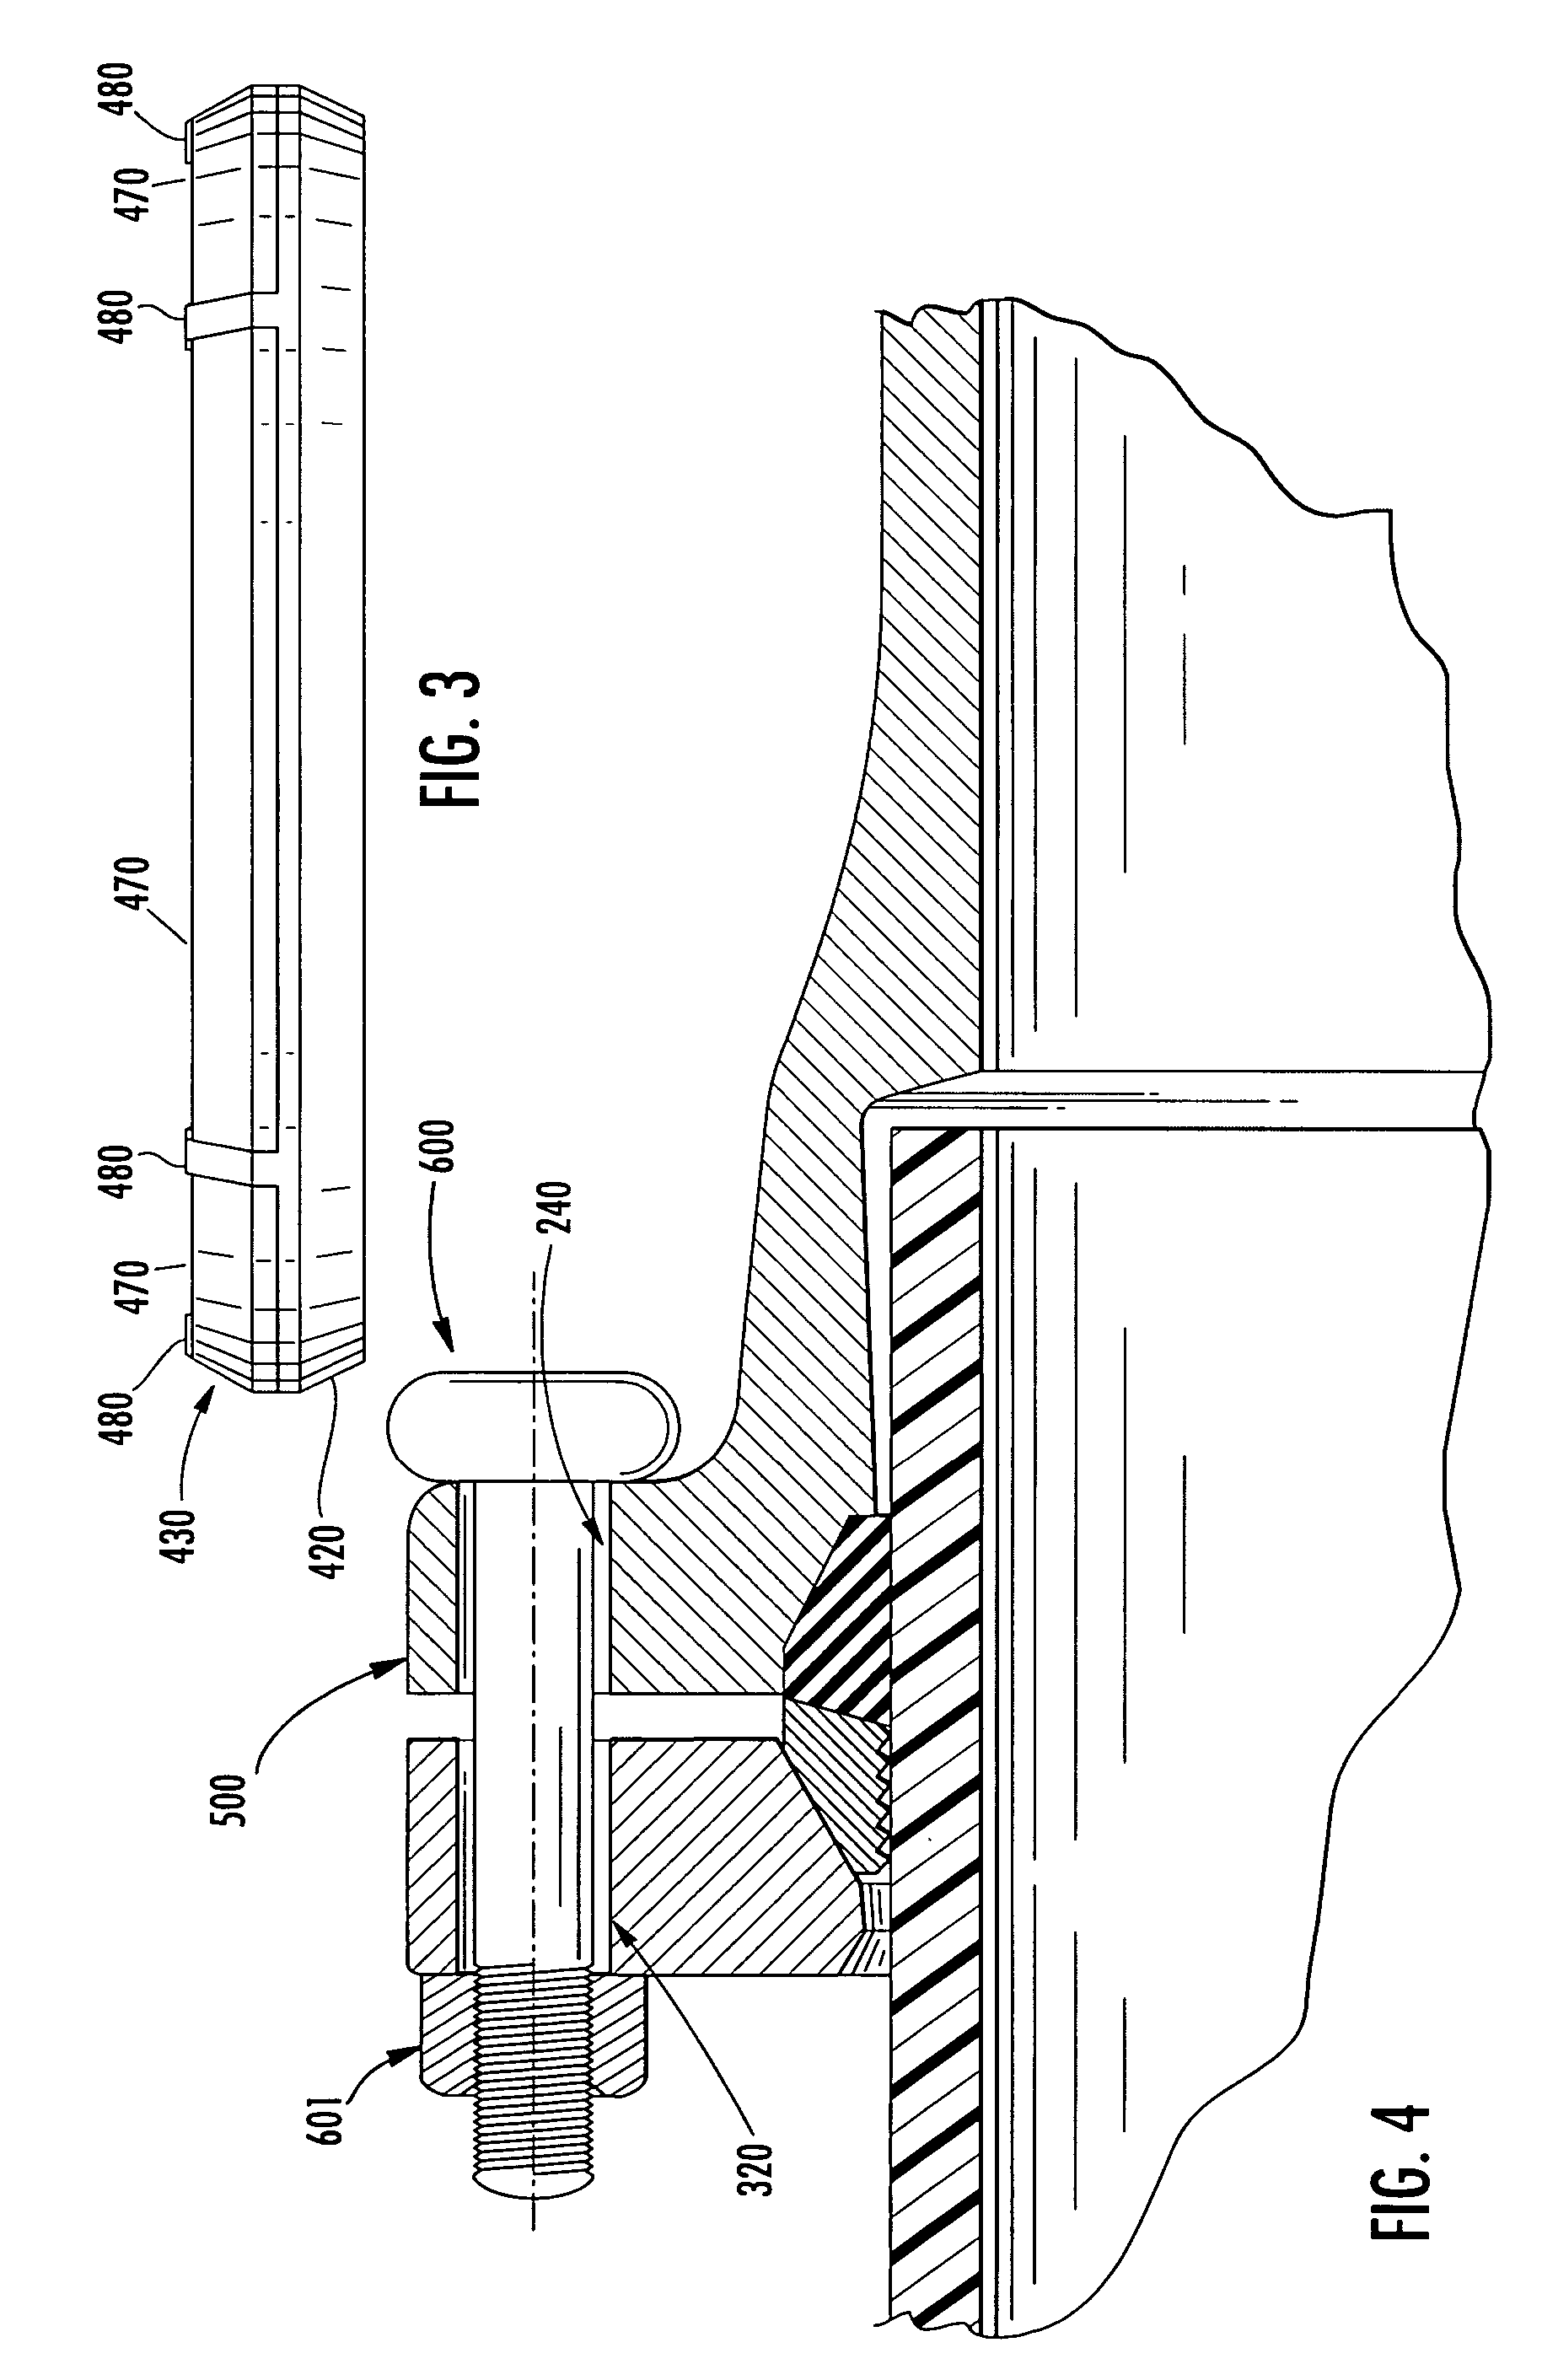 Mechanical pipe joint, gasket, and method for restraining pipe spigots in mechanical pipe joint bell sockets